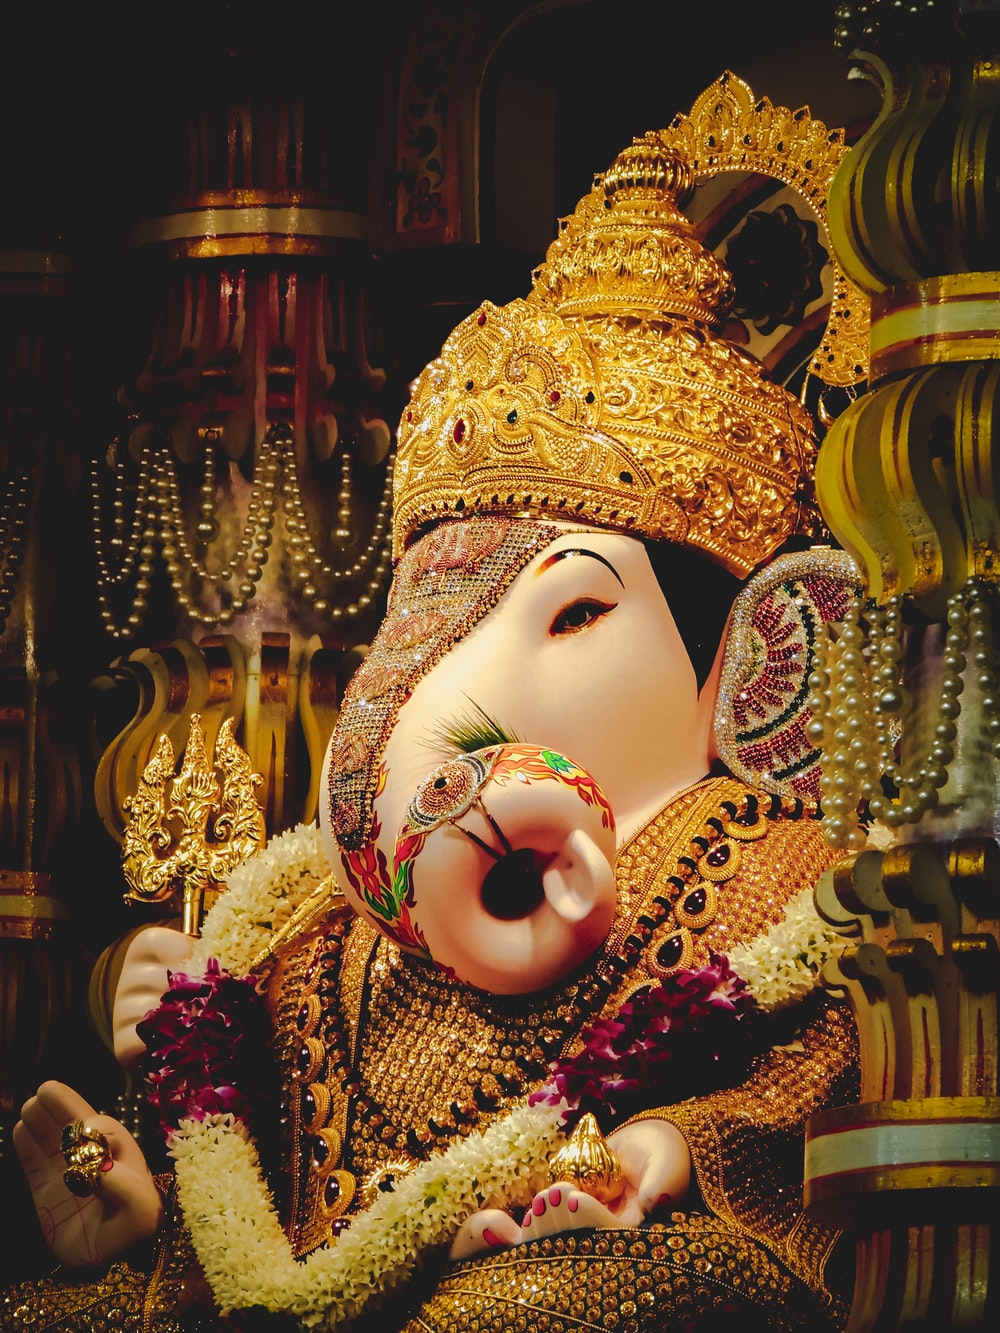 Best Ganpati Bappa Images Photos Download Ganpati Bappa Hd Pic Ganpati image is found all over in india and here we provide you all types of ganesh pictures and ganpati photo. best ganpati bappa images photos